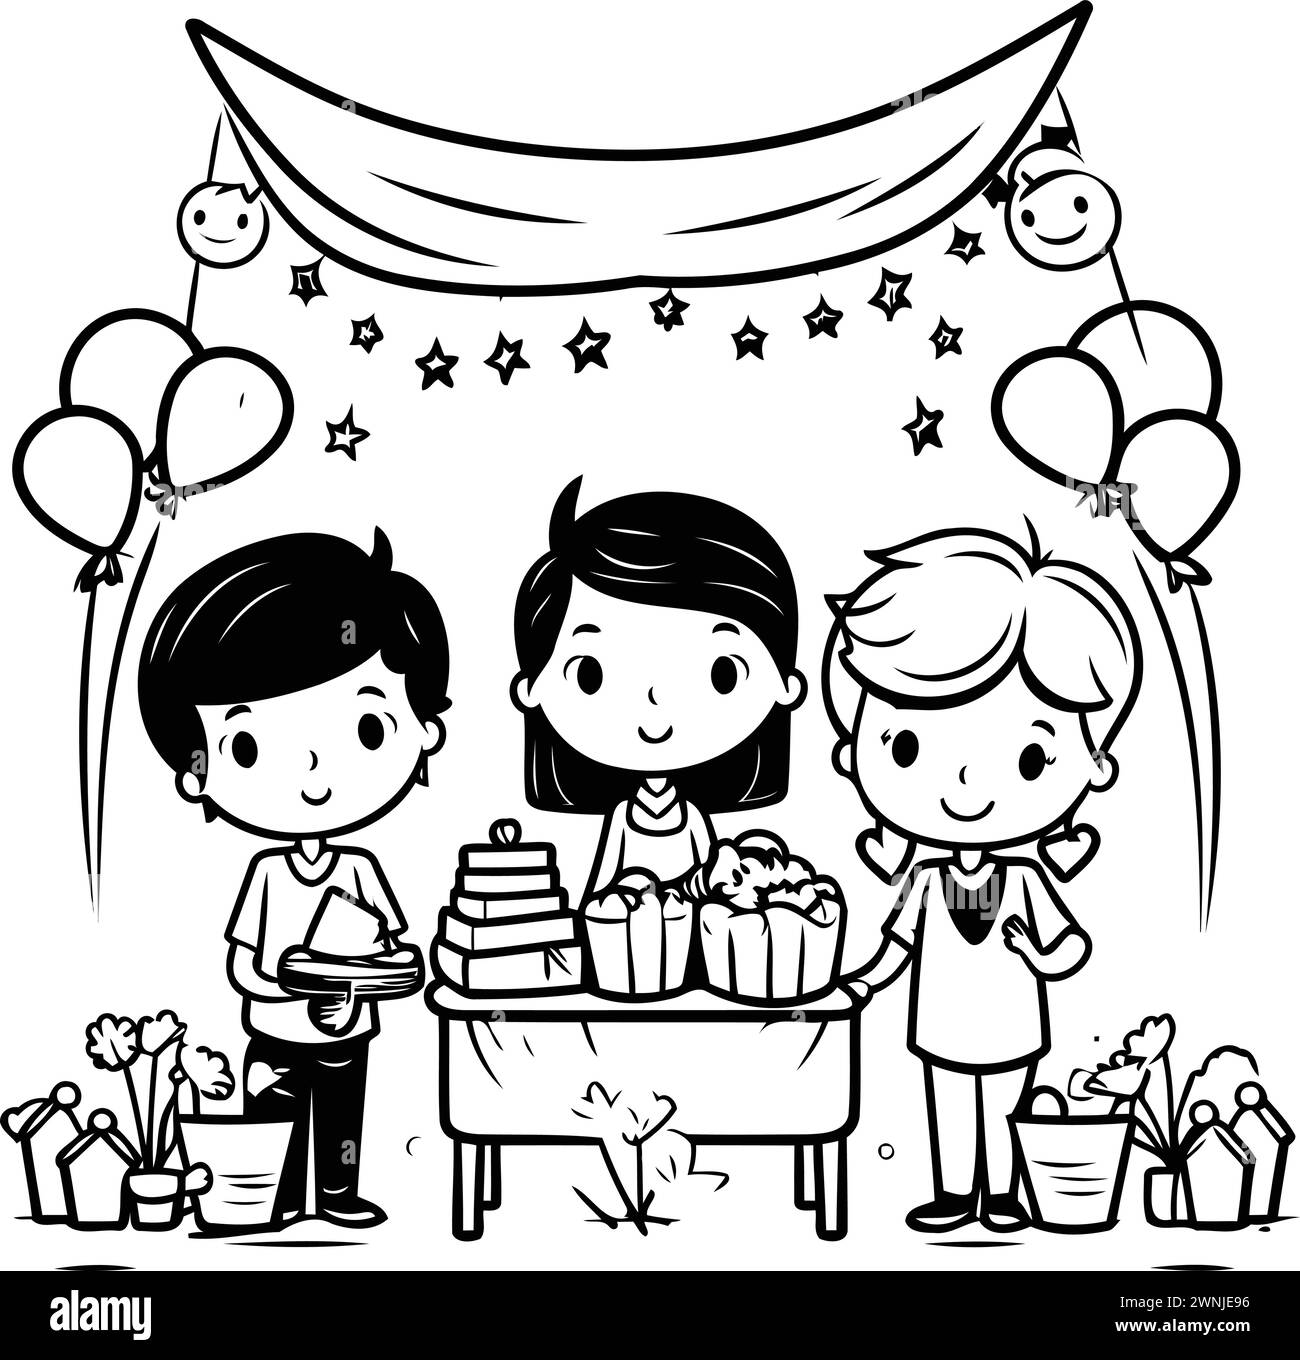 Children at a birthday party. Black and white vector illustration for coloring book. Stock Vector